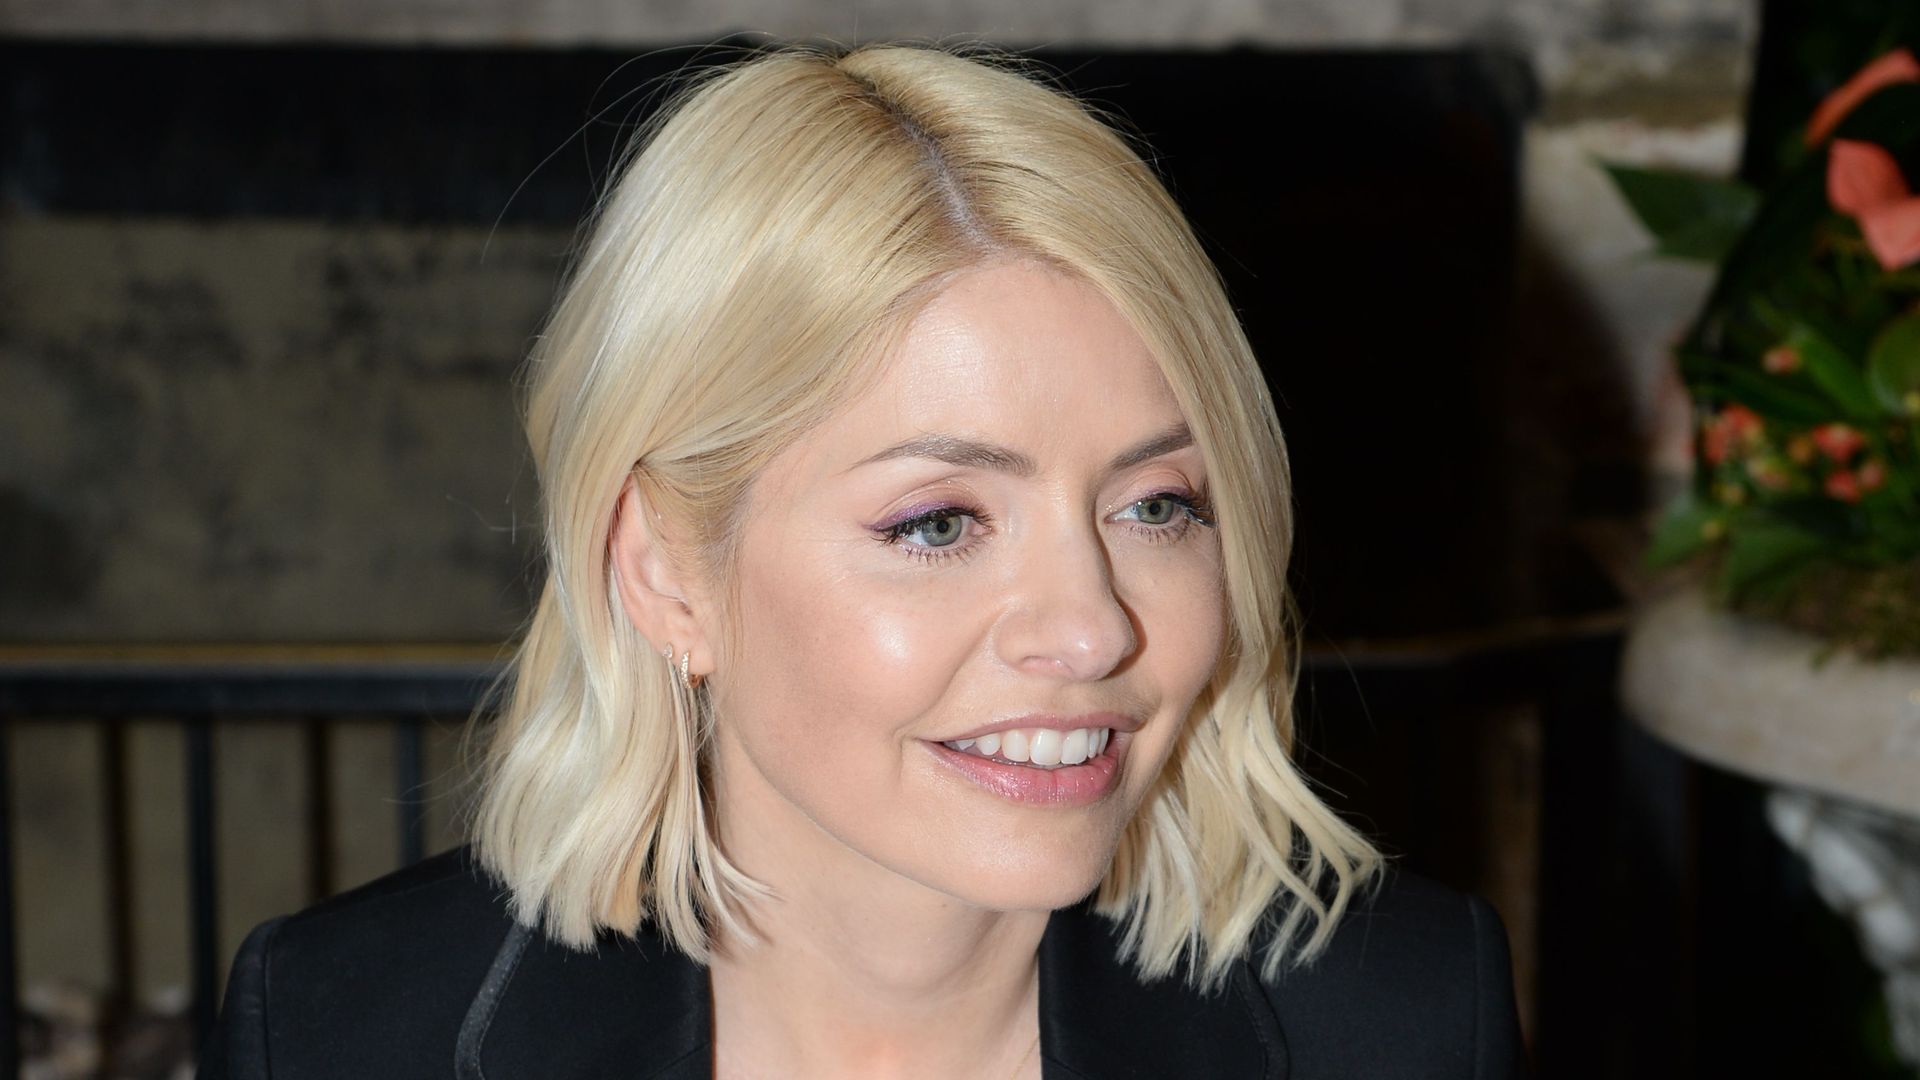 Holly Willoughby smiling in a black blazer